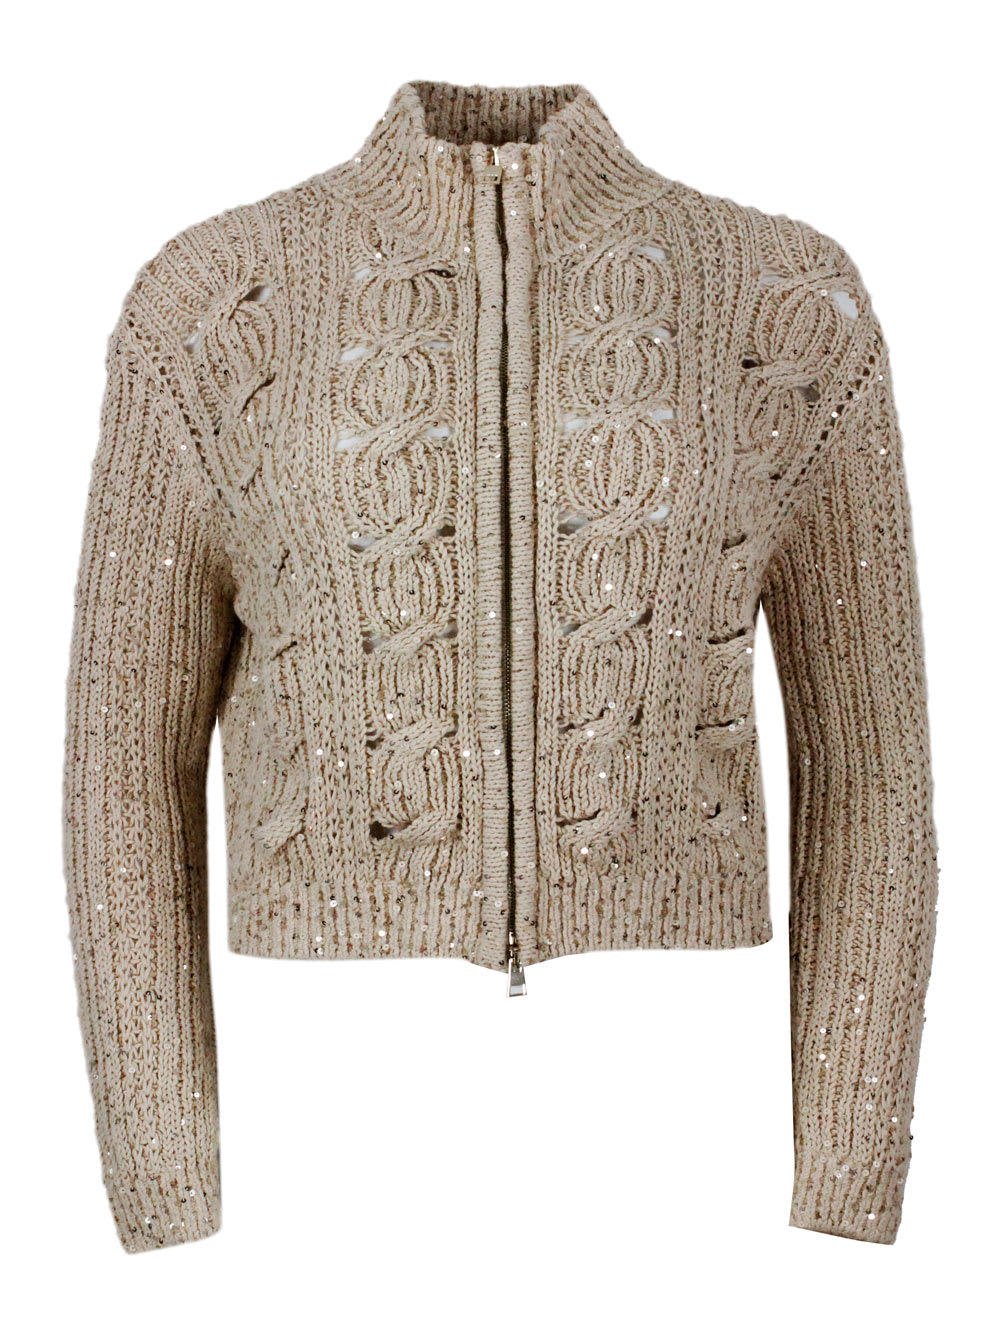 Lorena Antoniazzi Long-sleeved Full-zip Cardigan Jumper In Cotton Thread With Braided Work Embellished With Applied M In Gold